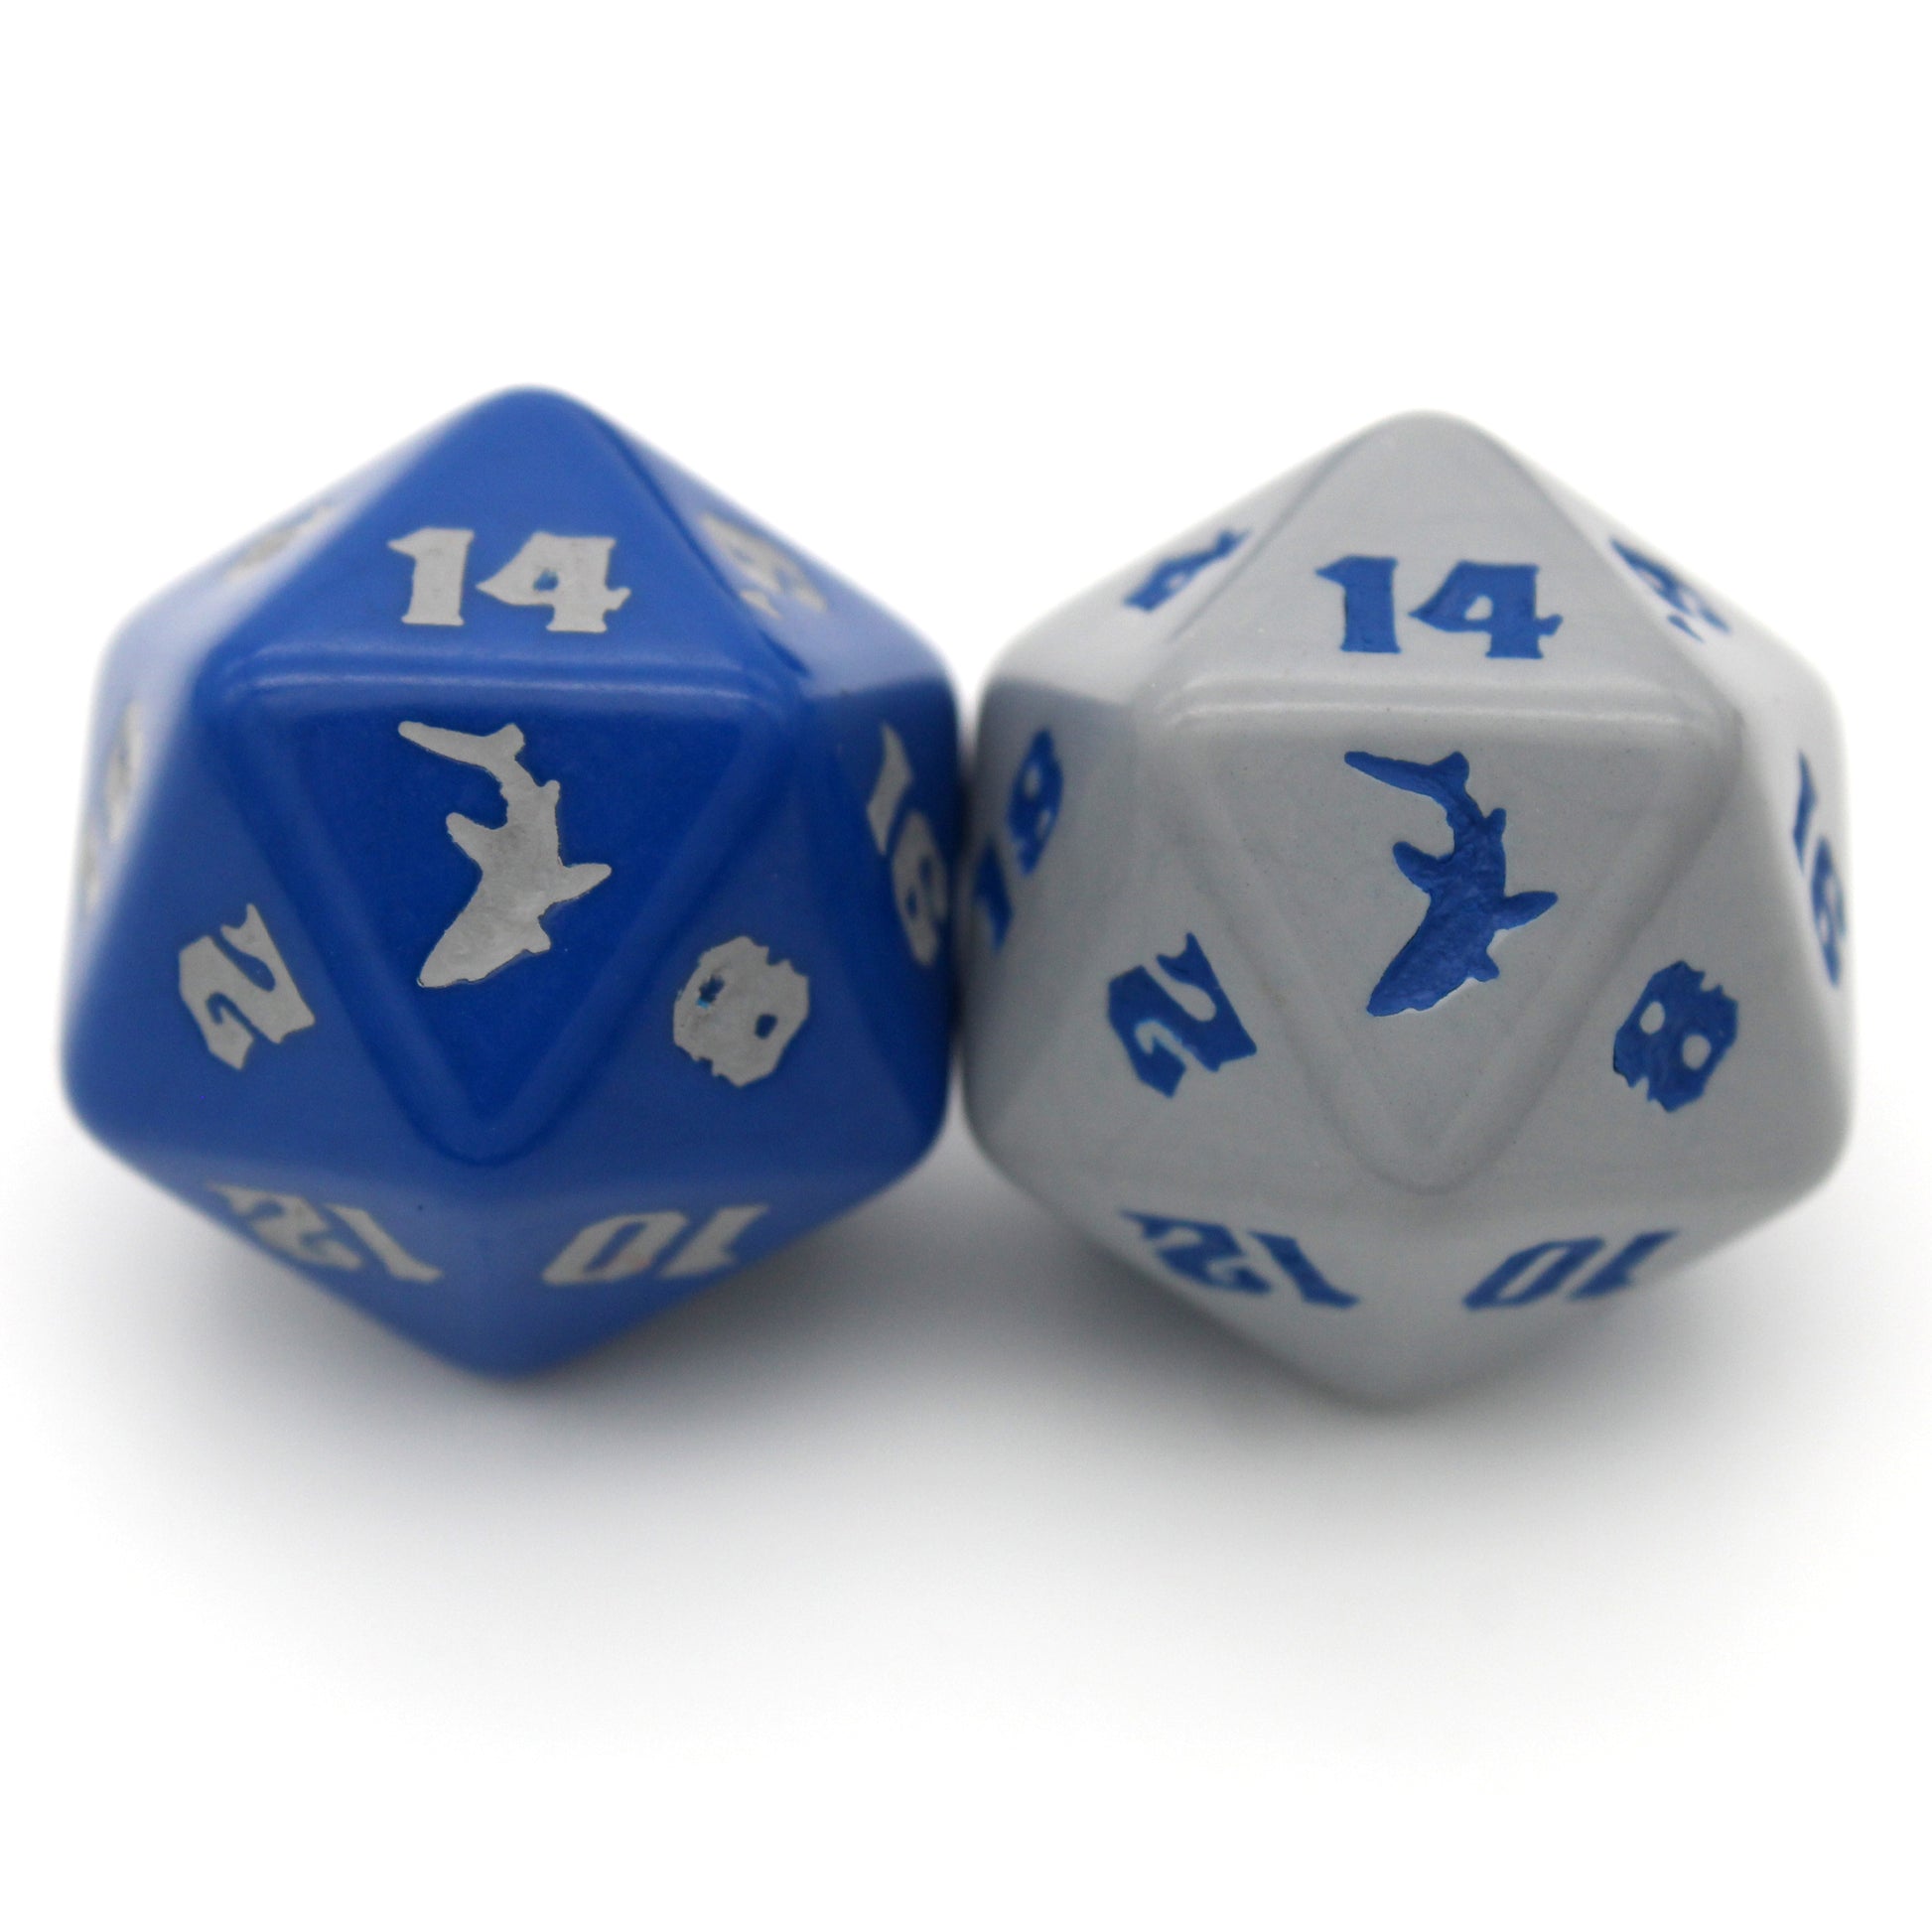 Hunter is an 8-piece engraved acrylic set in deep sea blue with shark transformation icons inked in fierce grey. Included is an alternate d20 in reverse colors.